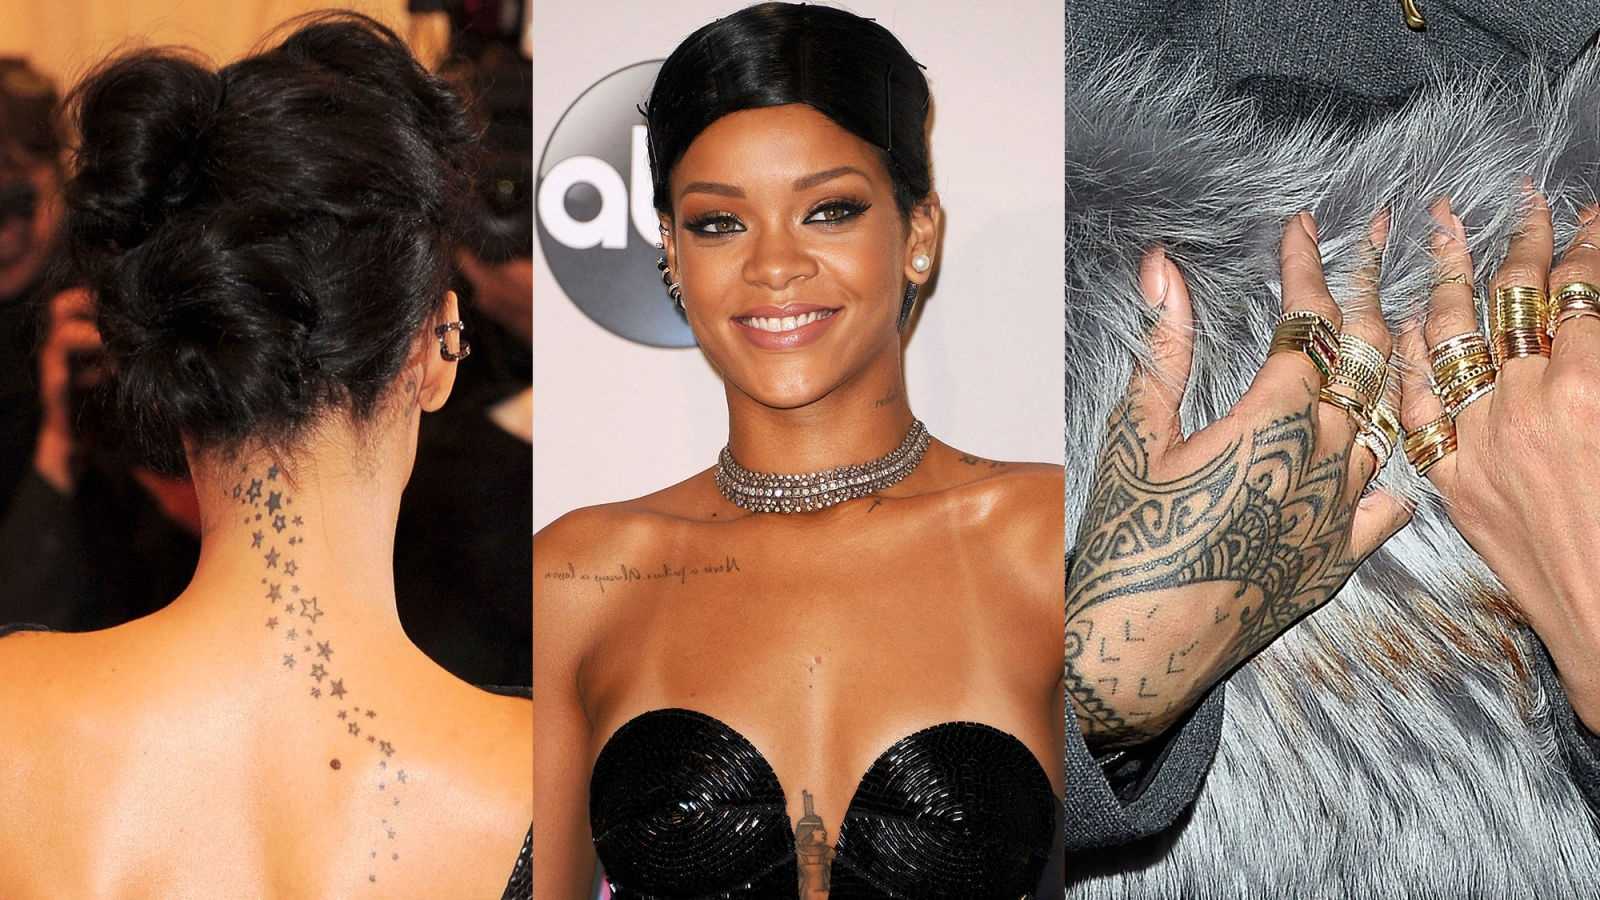 Female Celebrities with Name Tattoos